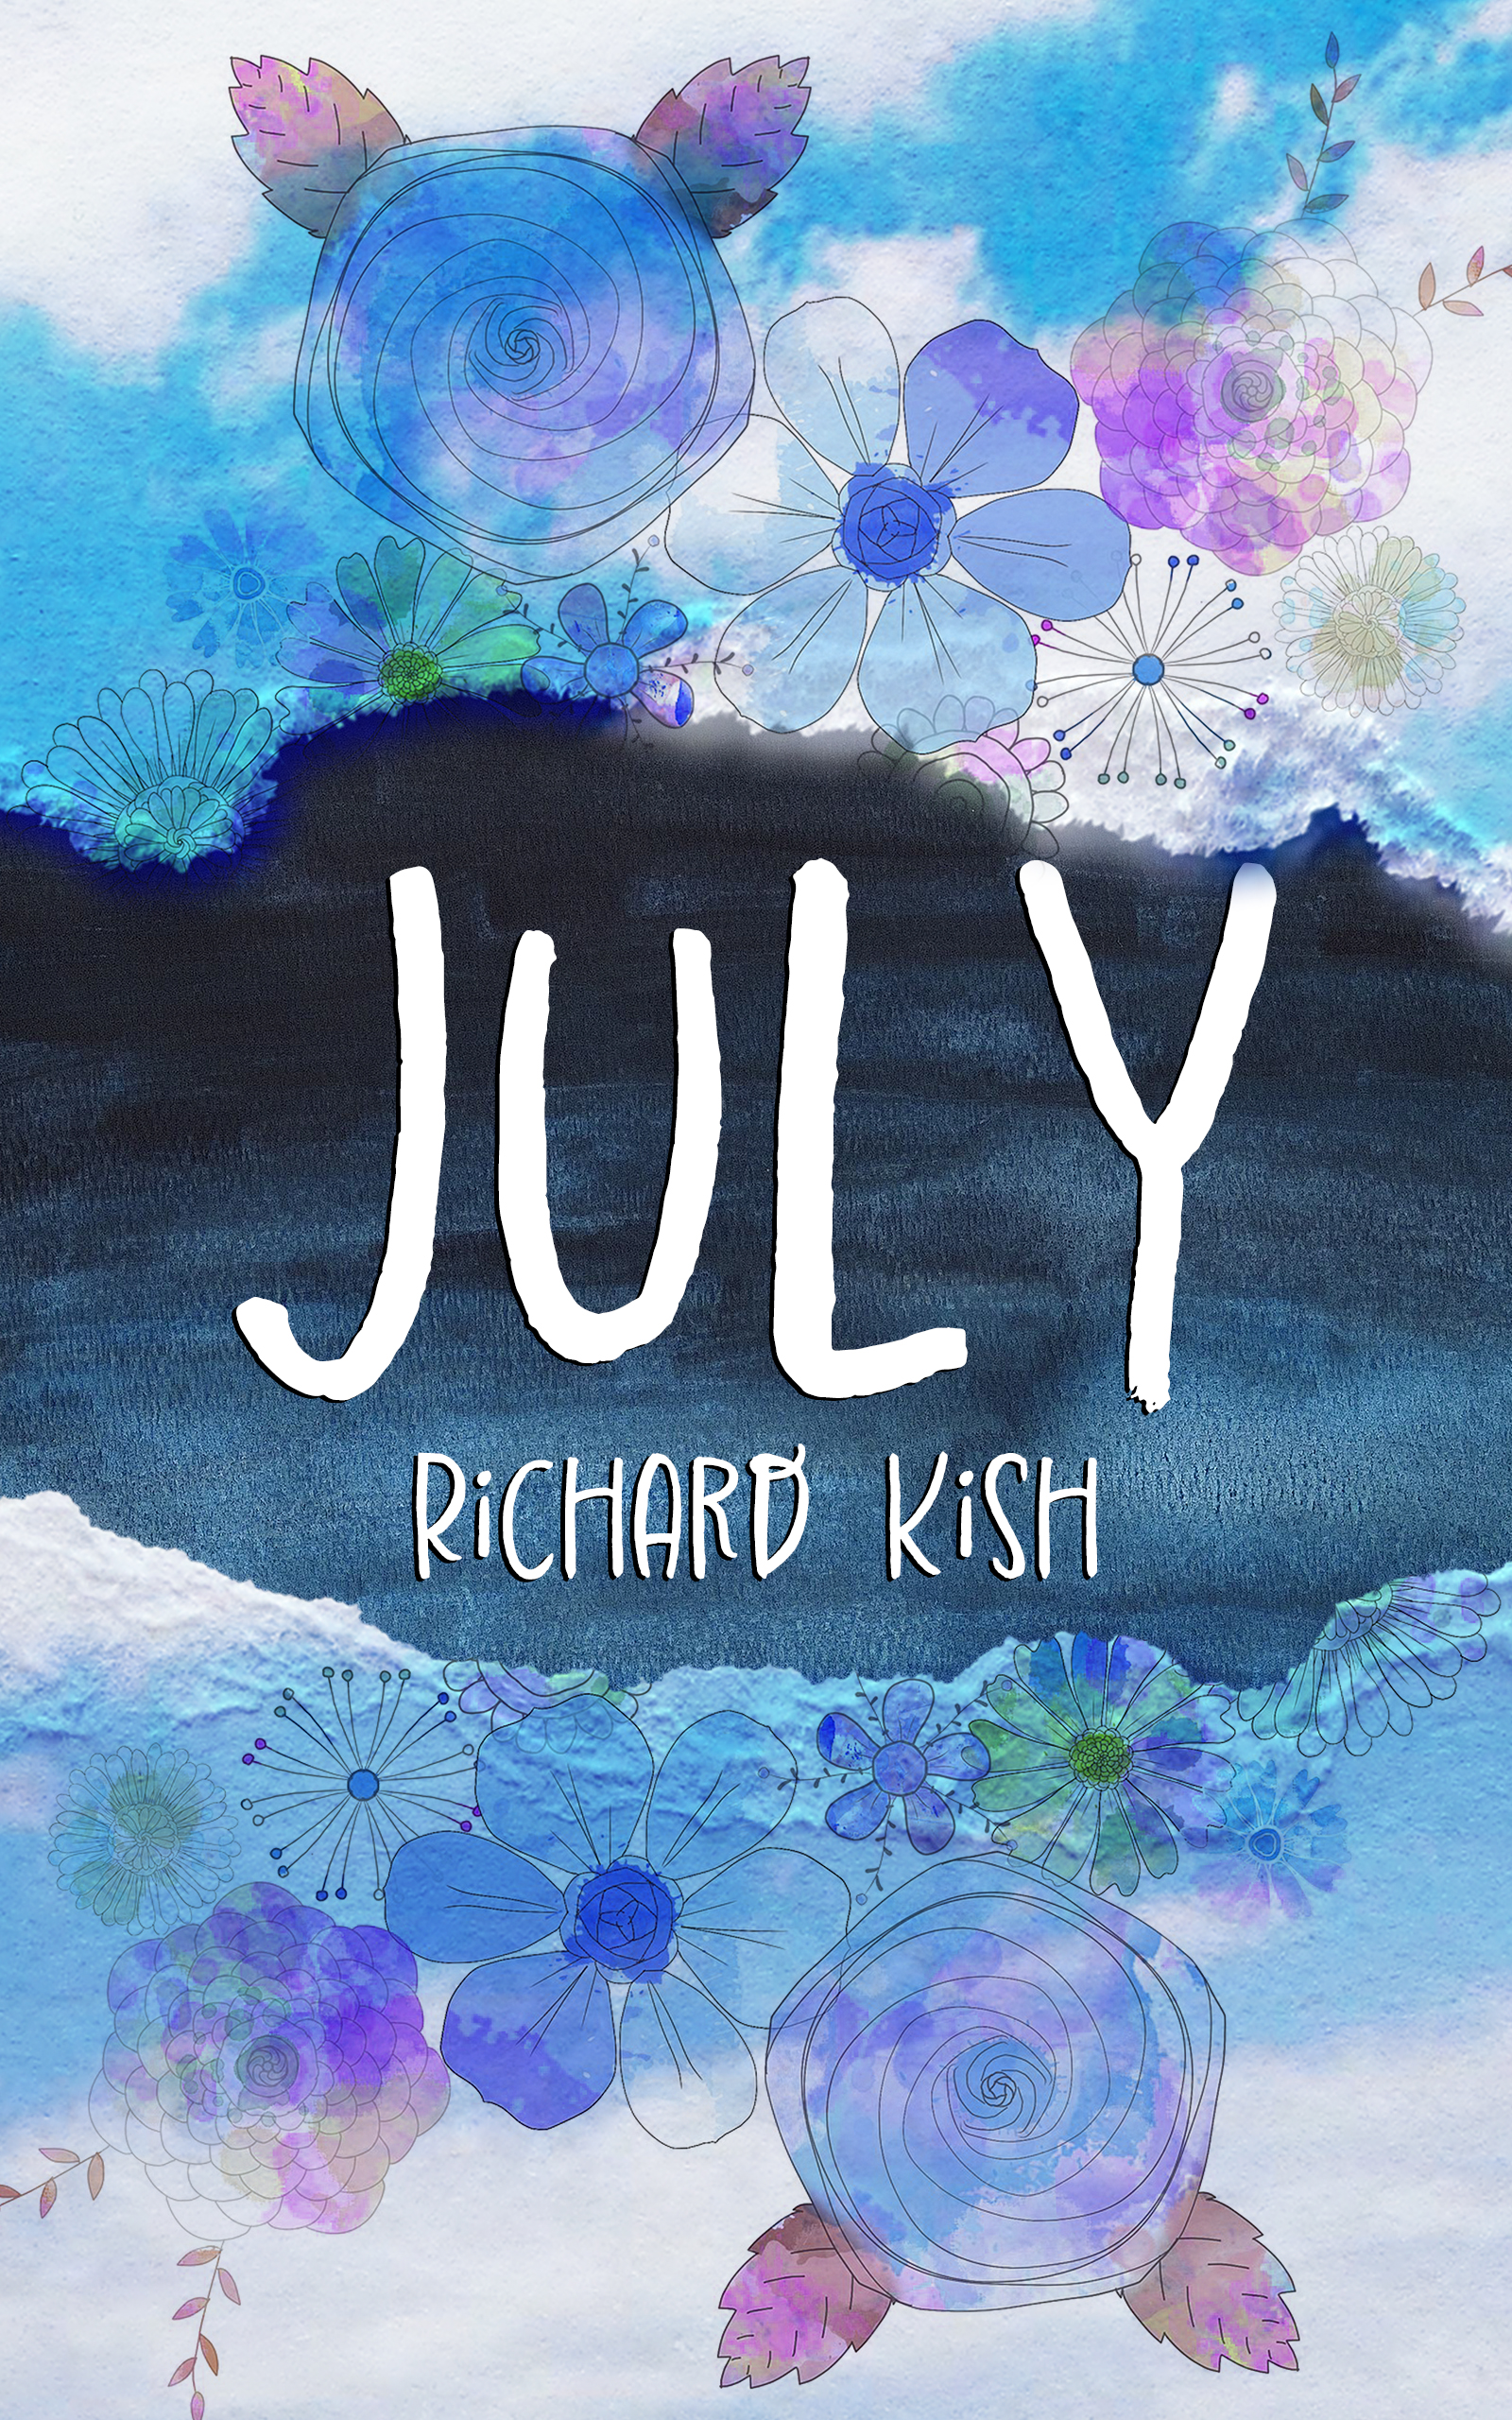 Front cover of July by Richard Kish